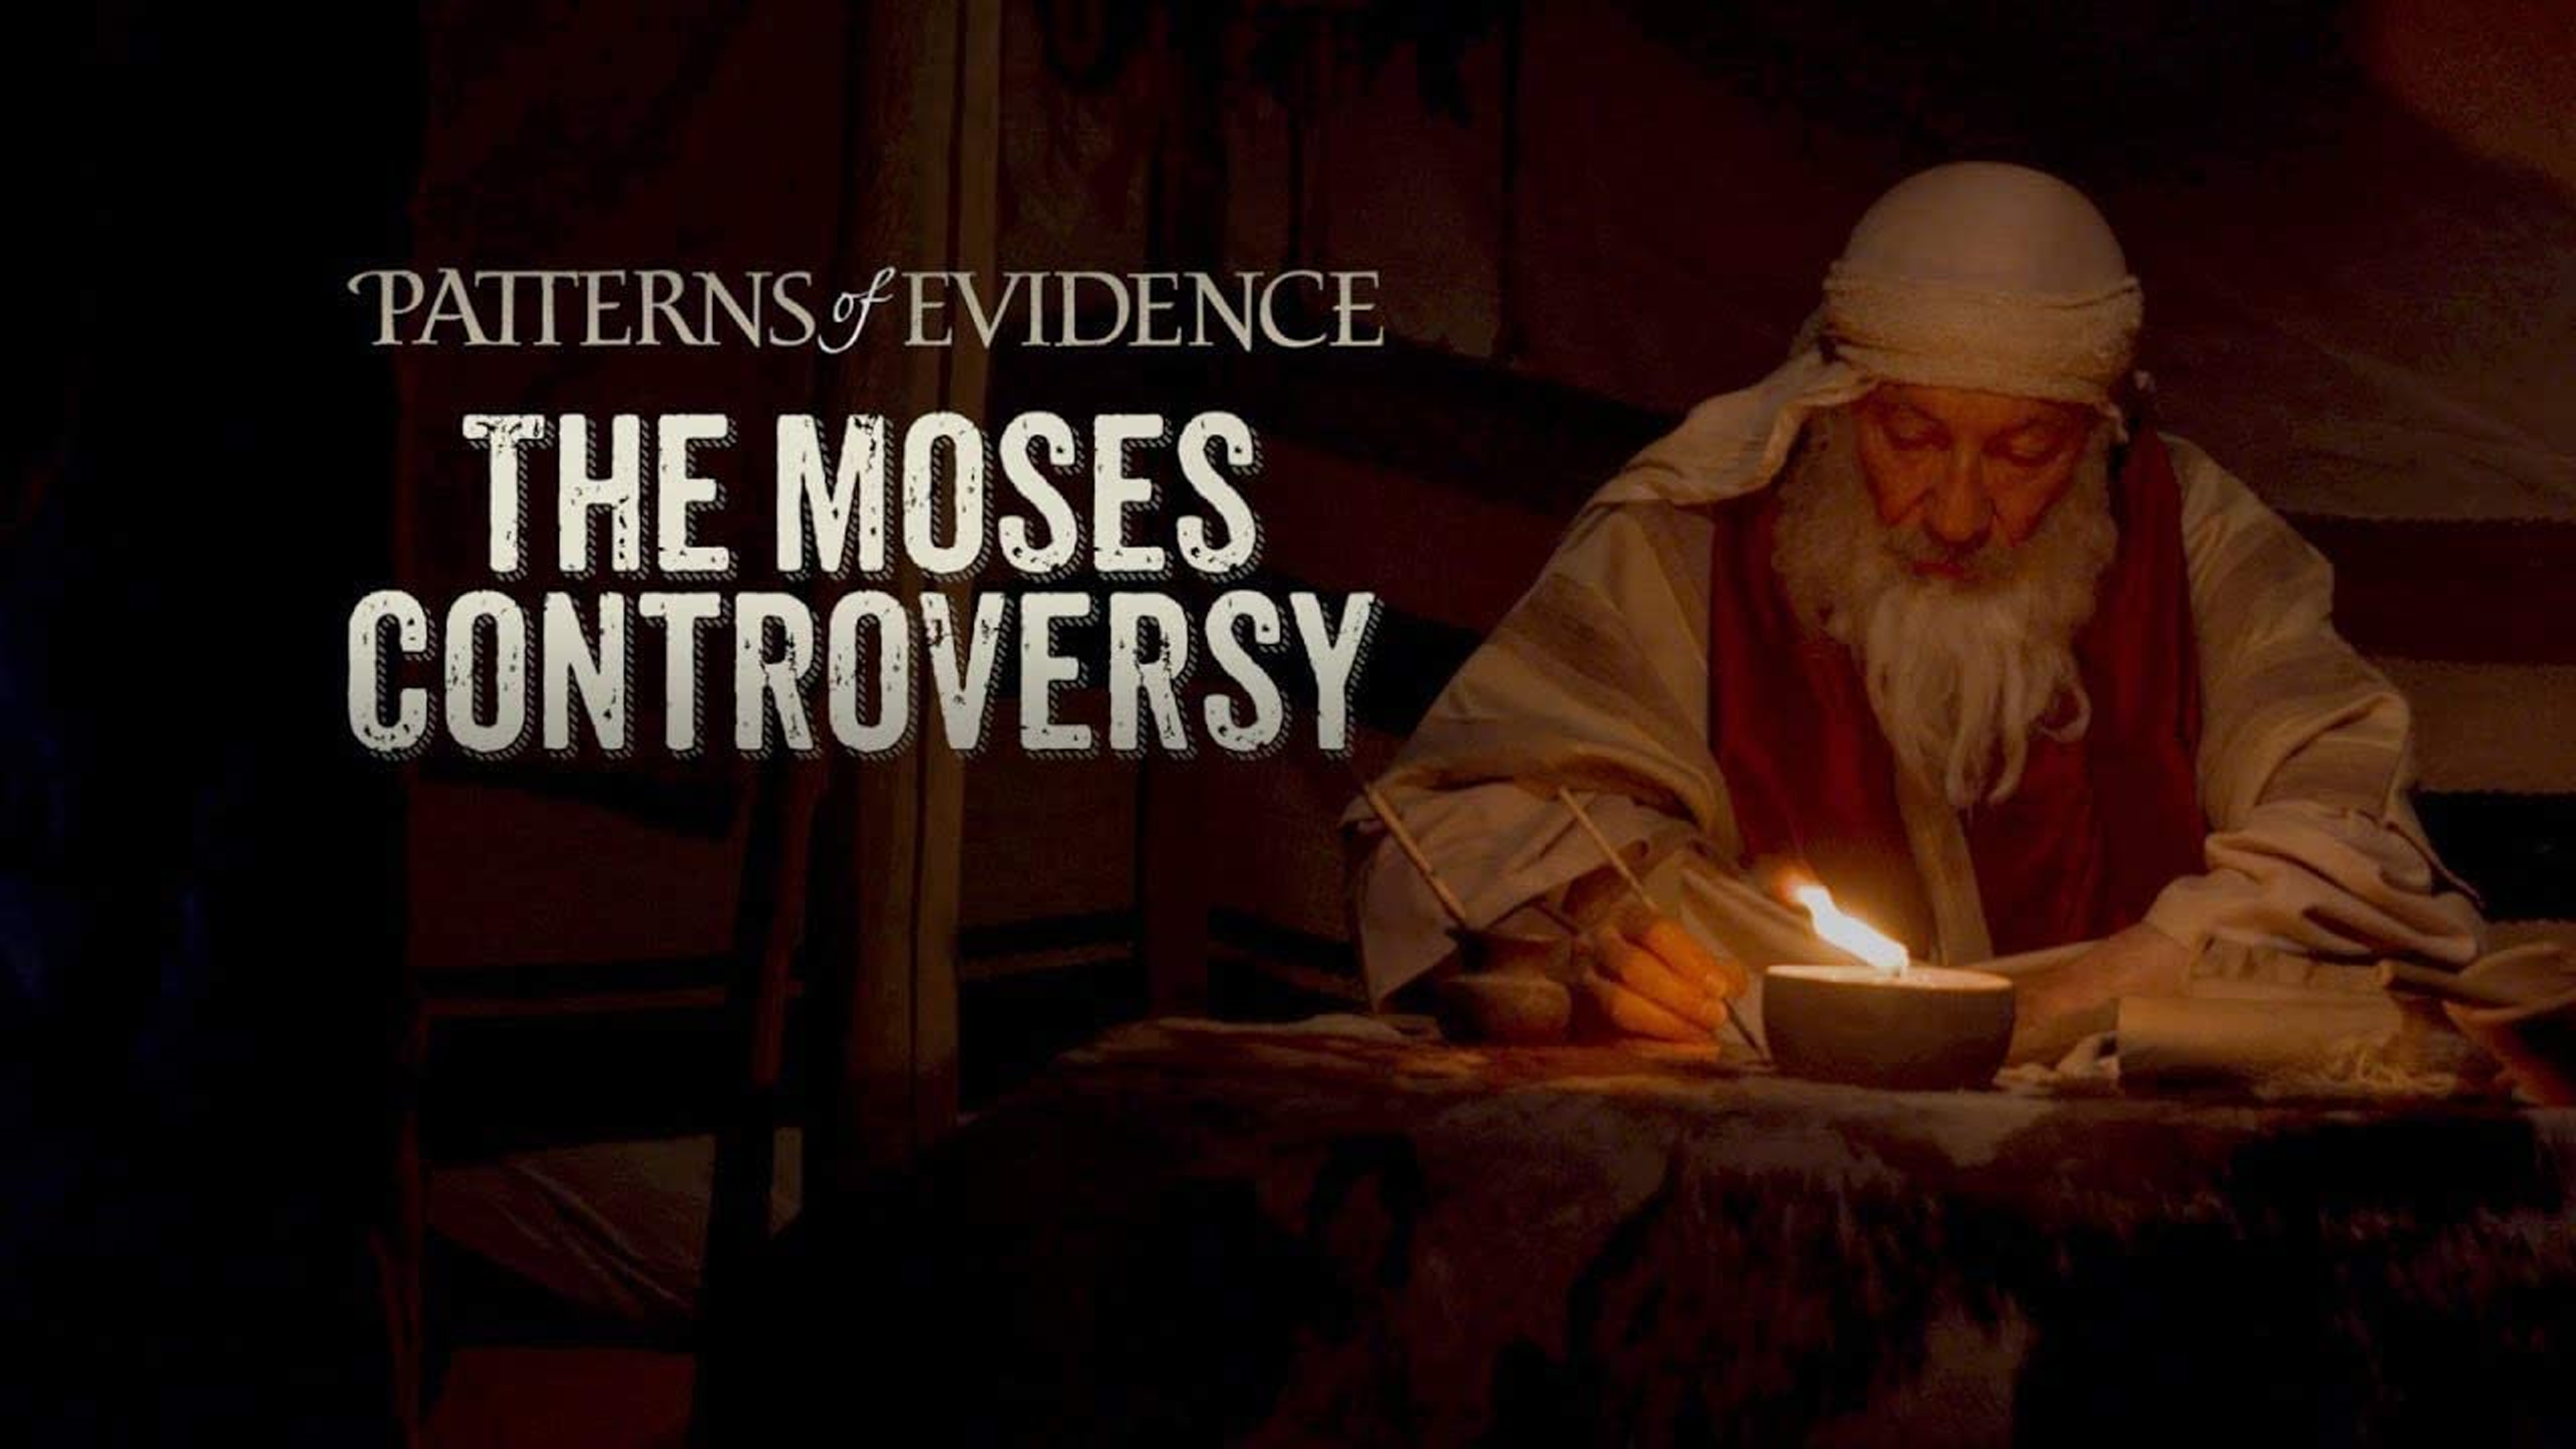 patterns evidence moses controversy 2019 download